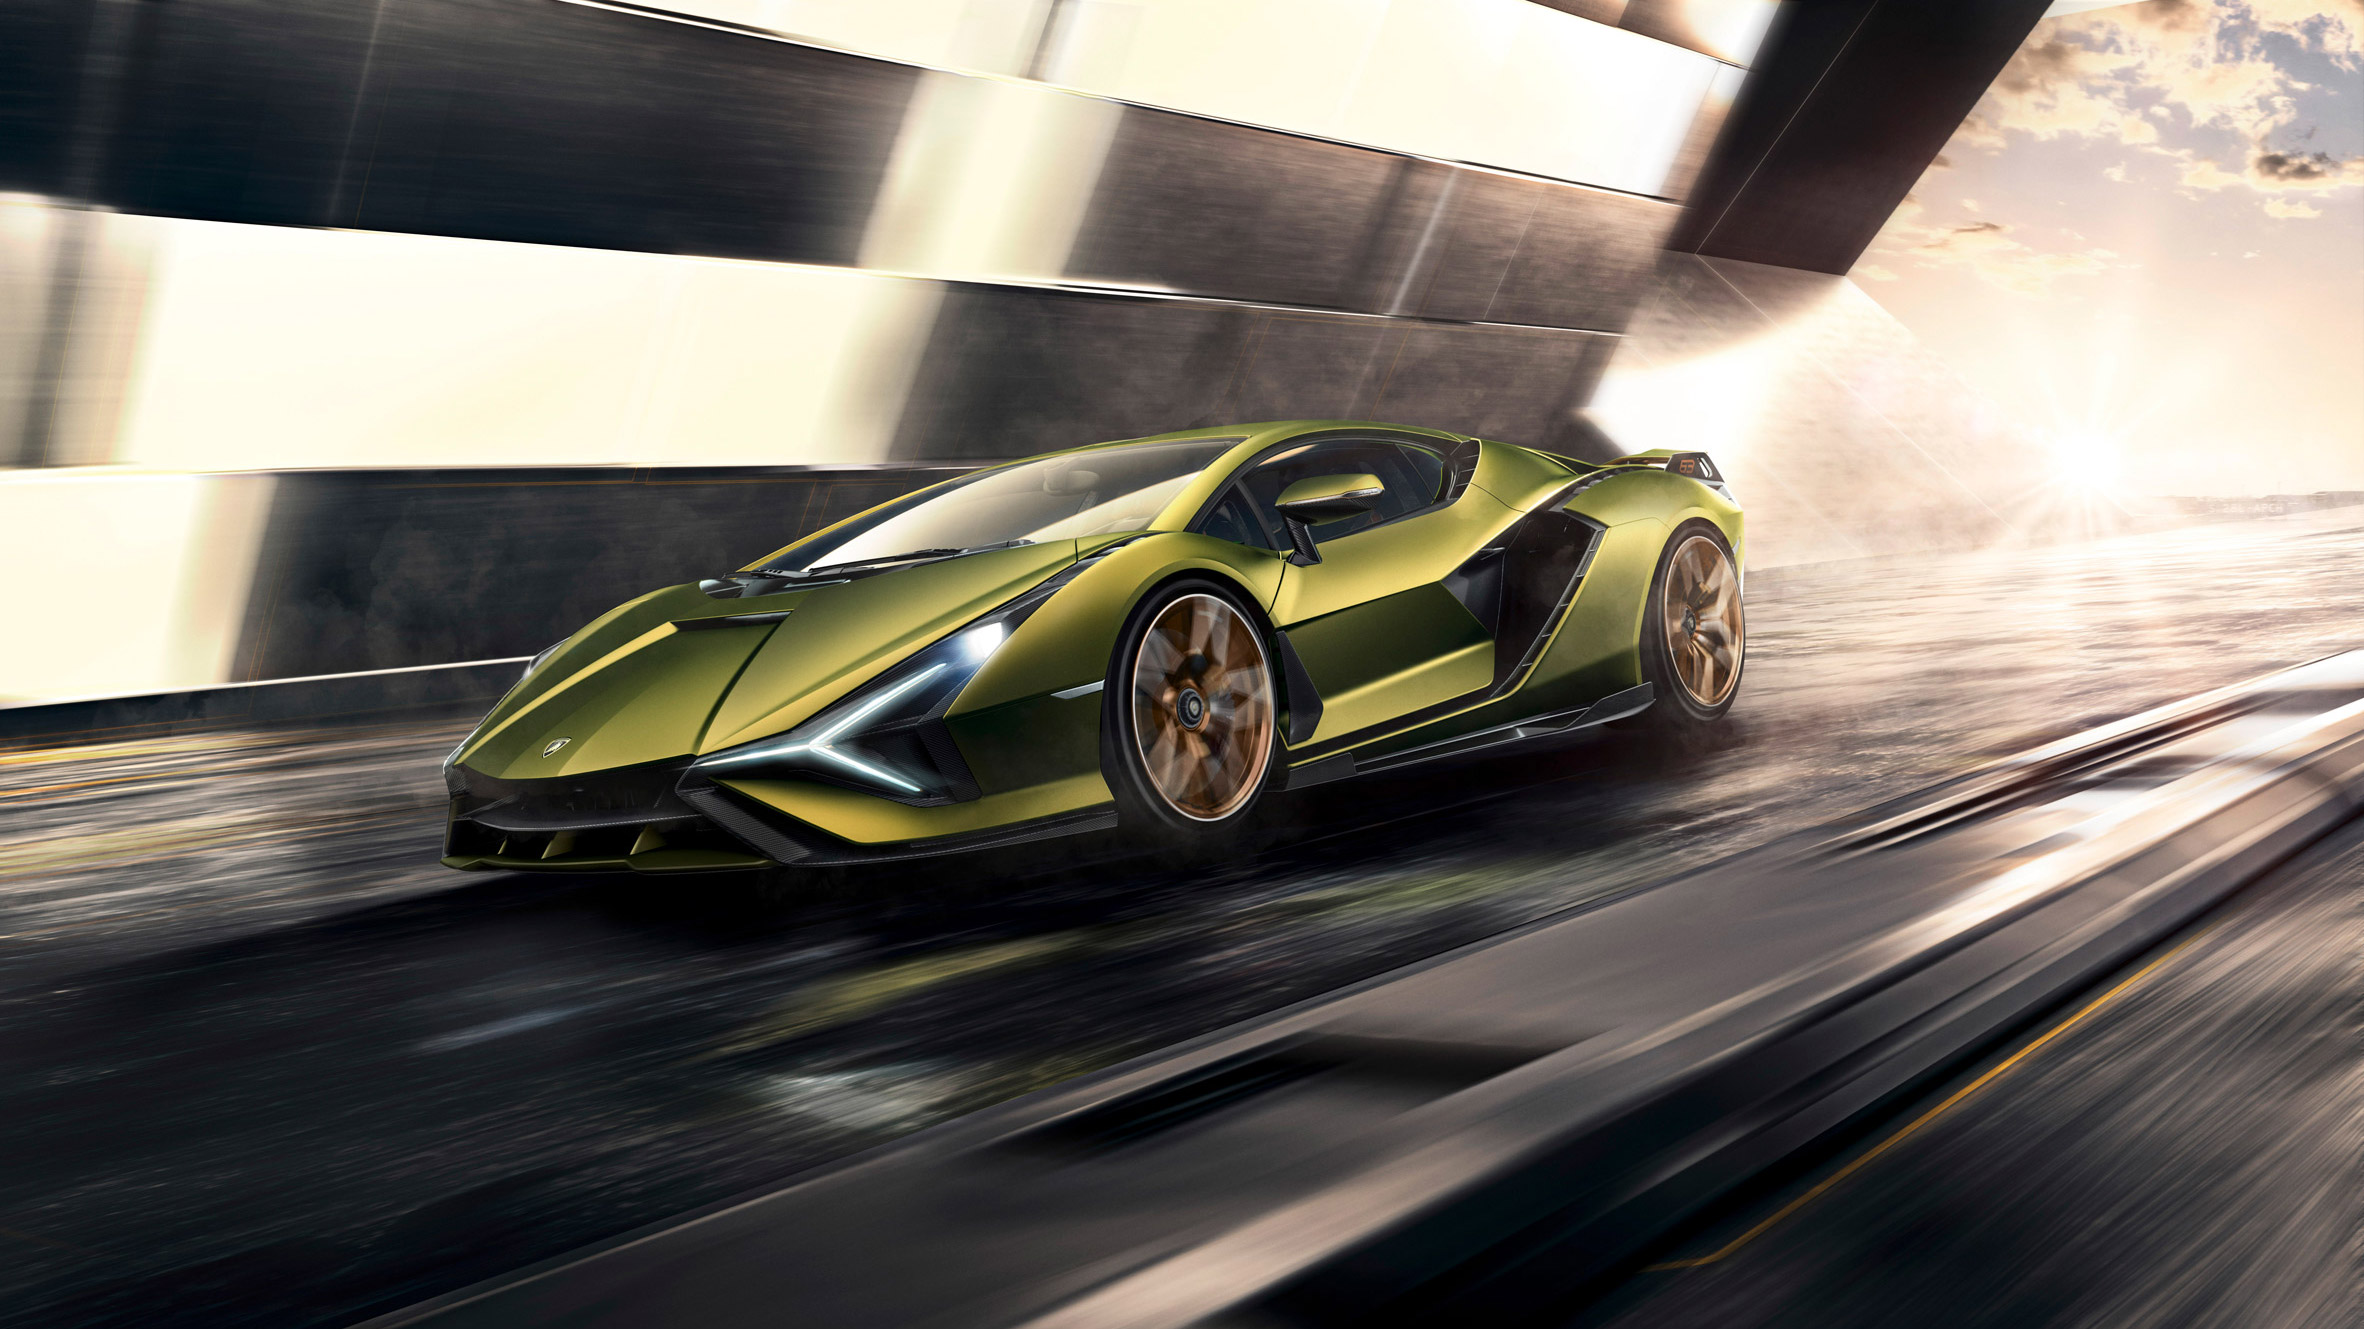 Lamborghini's first hybrid production supercar will be its "fastest car of all time"